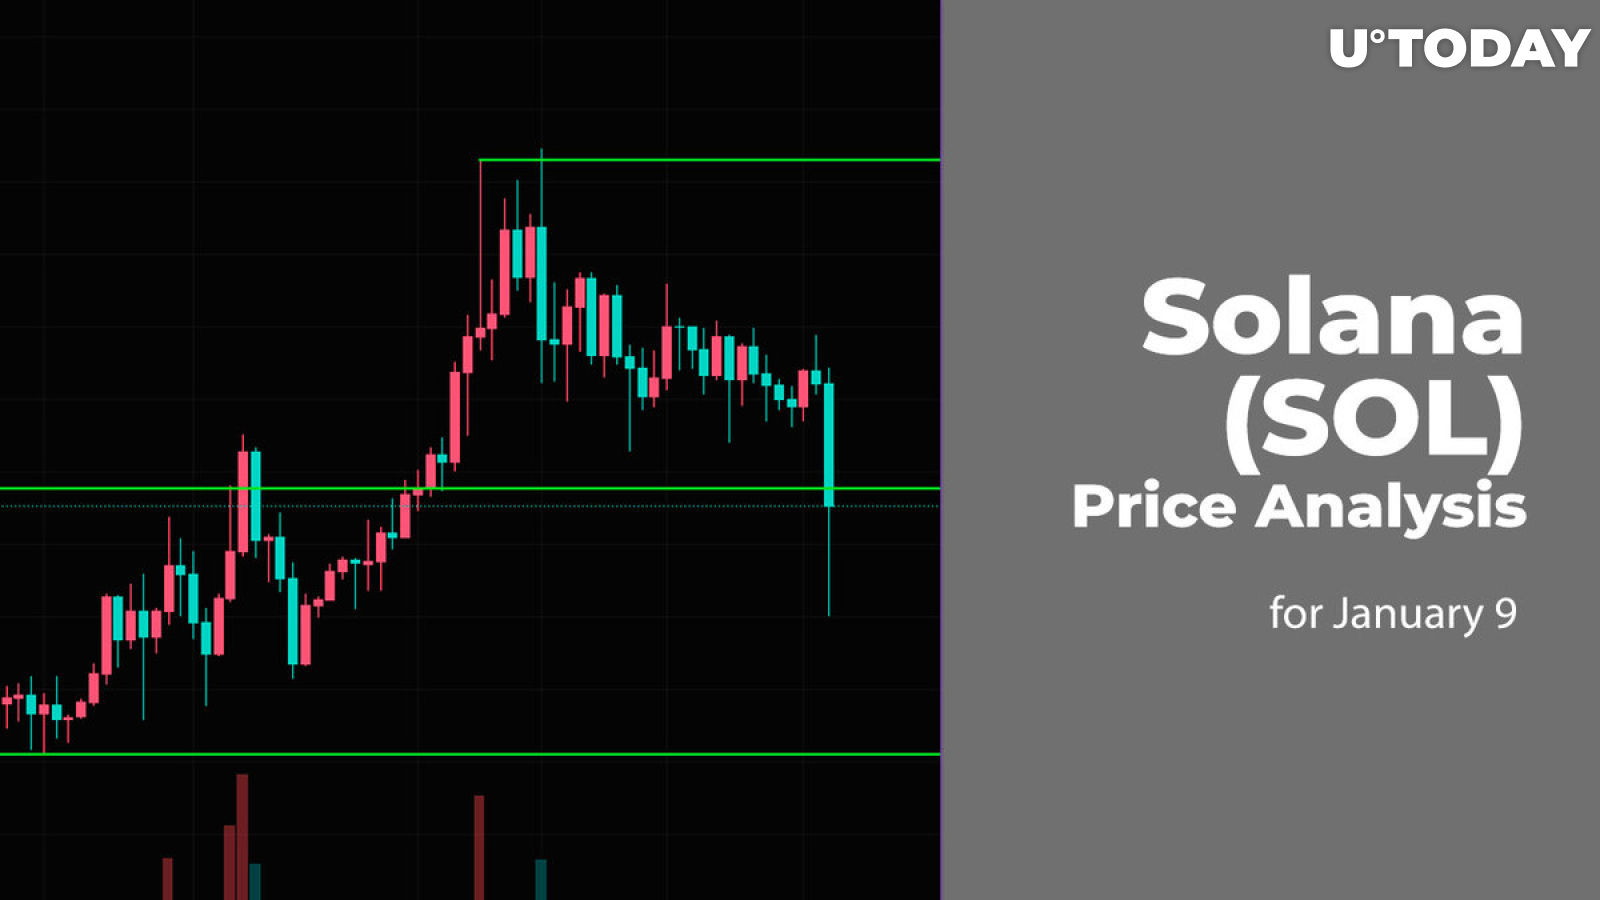 Solana (SOL) Price Analysis for January 9